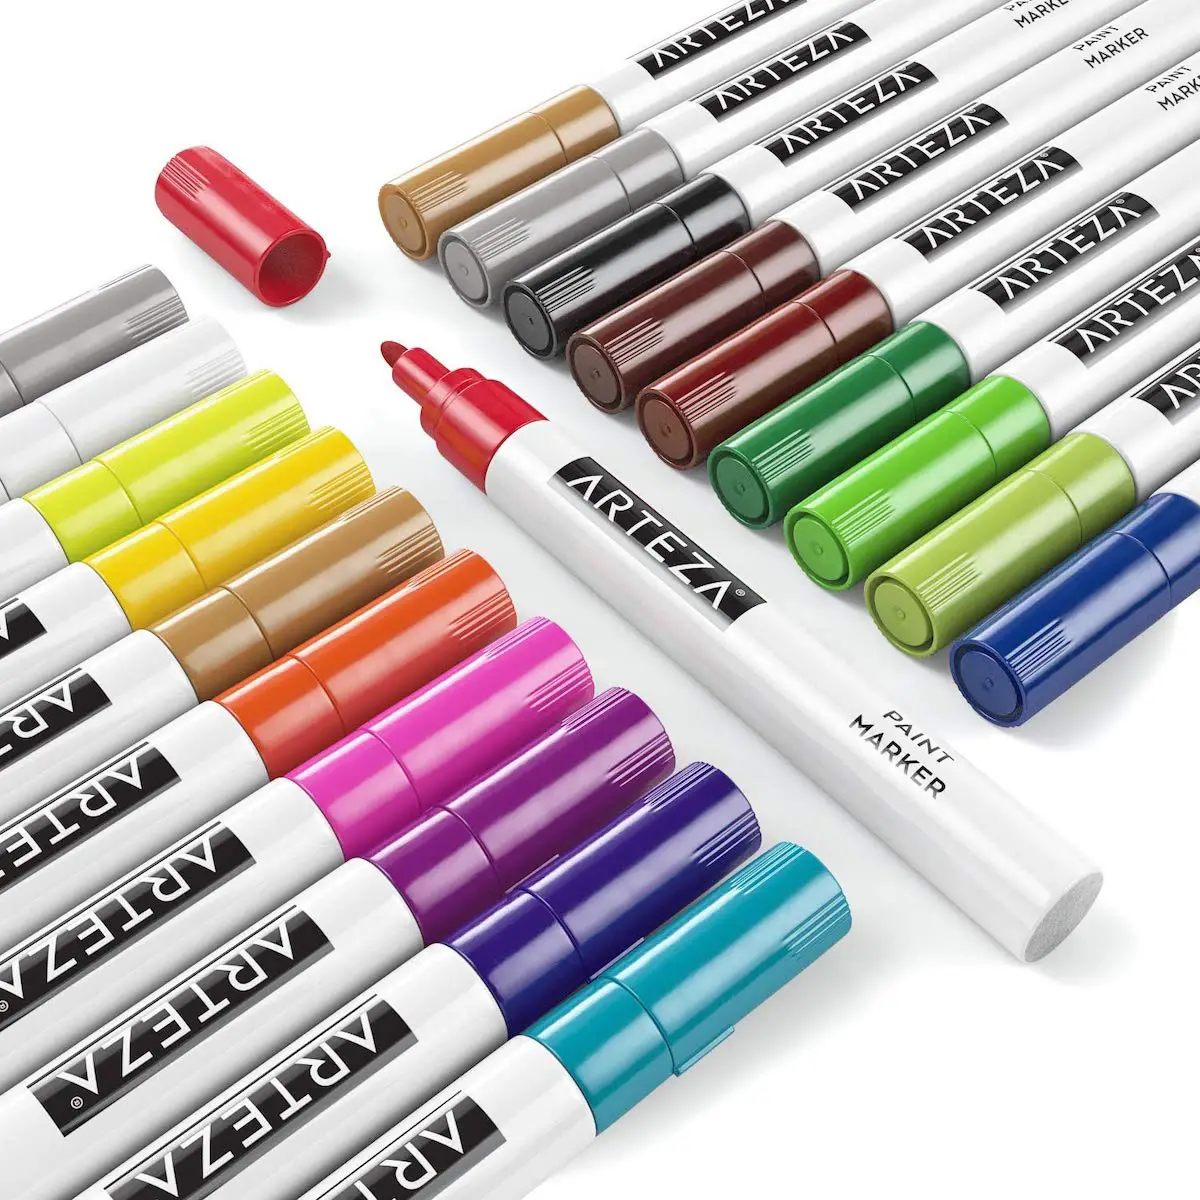 ARTEZA Arteza Oil Paint Markers, Assorted Colors- 20 Pack at